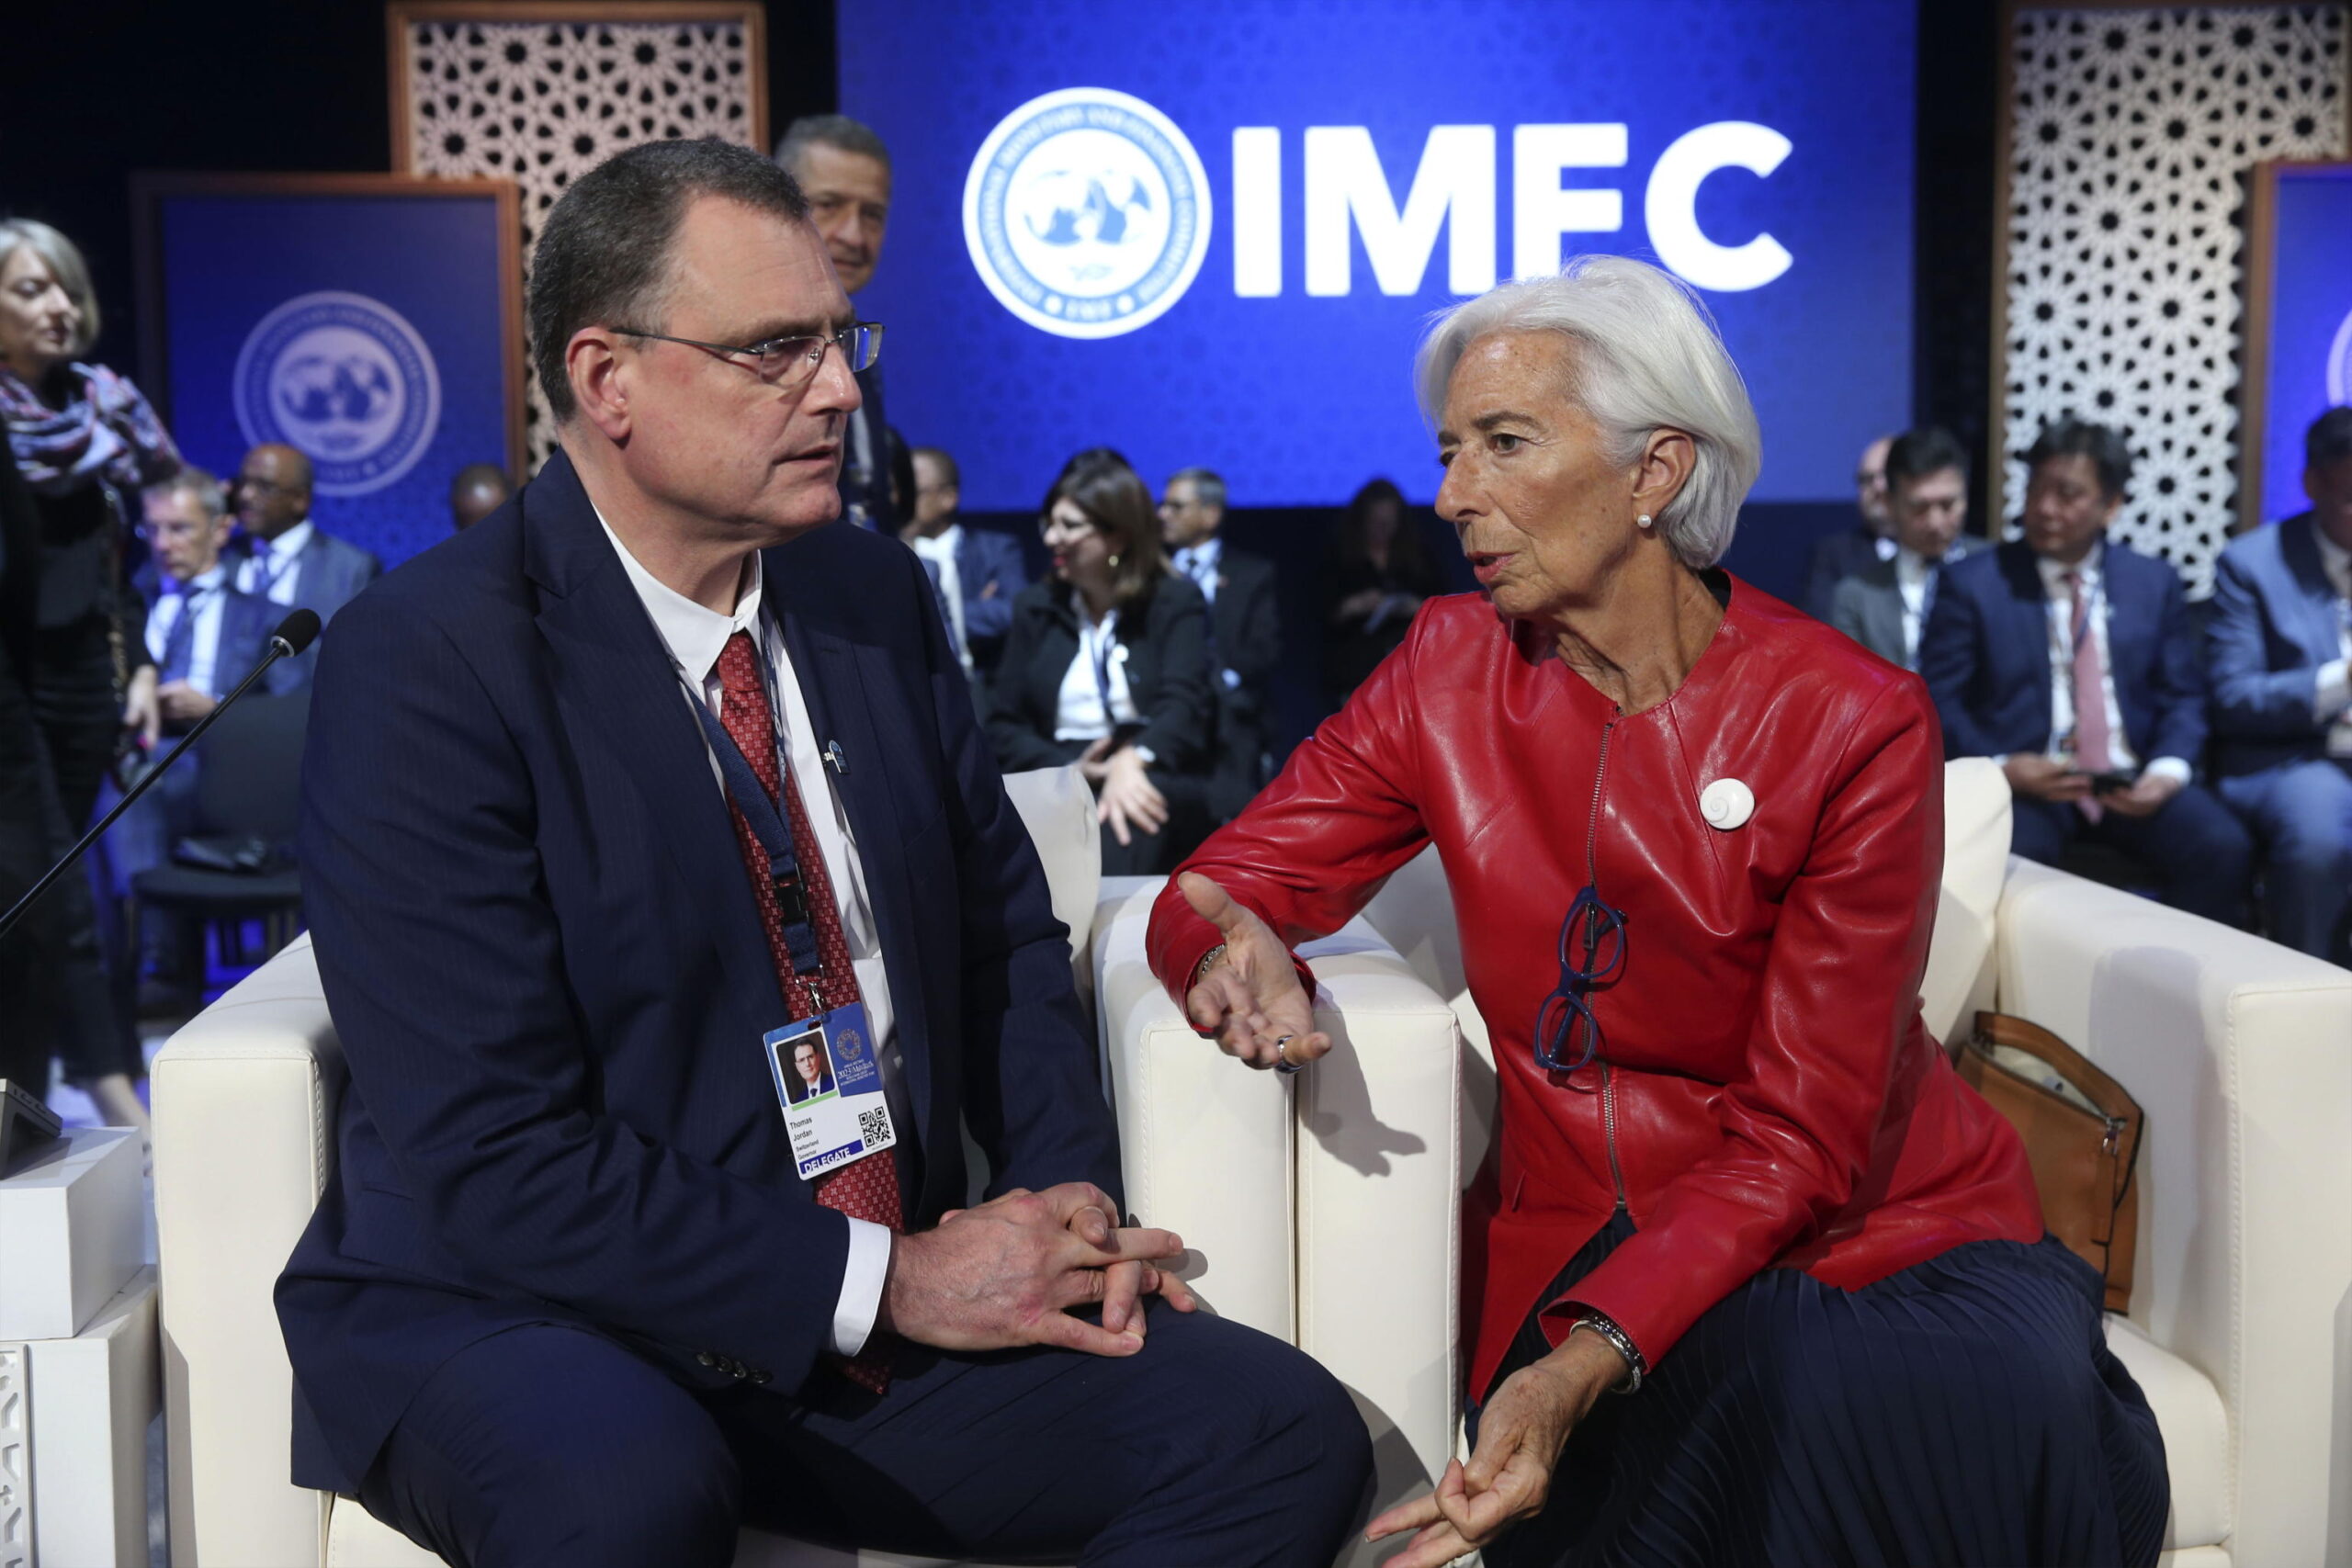 epa10918480 European Central Bank President, Christine Lagarde (R), and Swiss National Bank Chairman, Thomas Jordan, attend the plenary session of the International Monetary Finance Committee (IMFC) during the annual meeting of the International Monetary Fund (IMF) and the World Bank Group (WBG), in Marrakesh, Morocco, 14 October 2023. This year's annual meetings, held from 09 to 15 October 2023, are joined by central bankers, ministers of finance and development, parliamentarians, private sector executives, representatives from civil society organizations and academics.  EPA/Jalal Morchidi